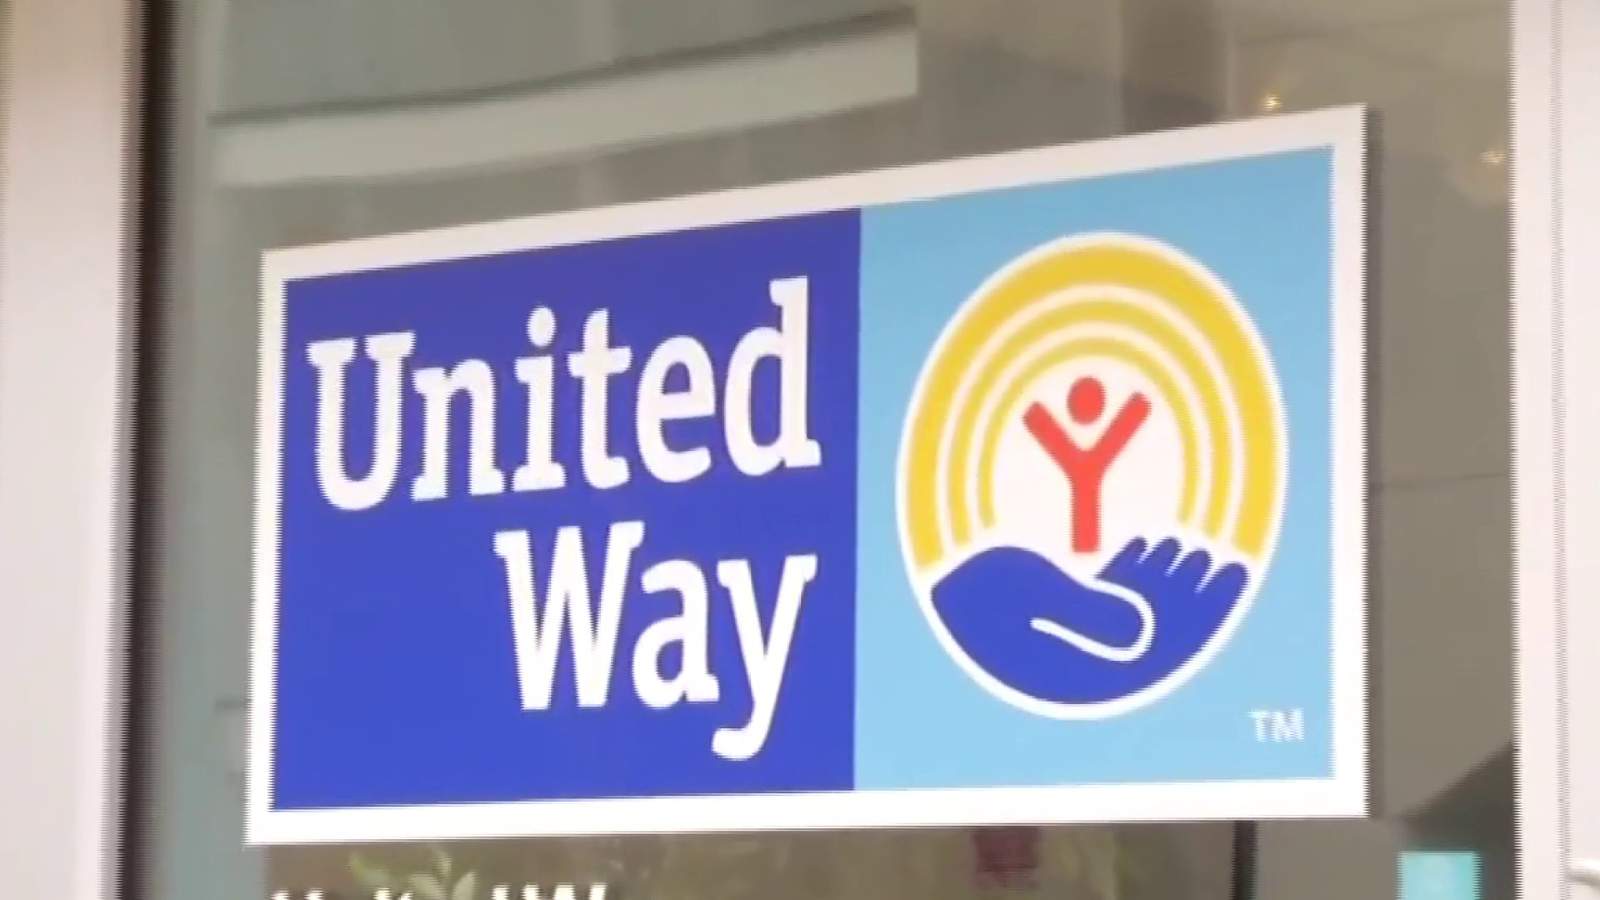 United Way of the Roanoke Valley reaches COVID-19 relief fundraising goal